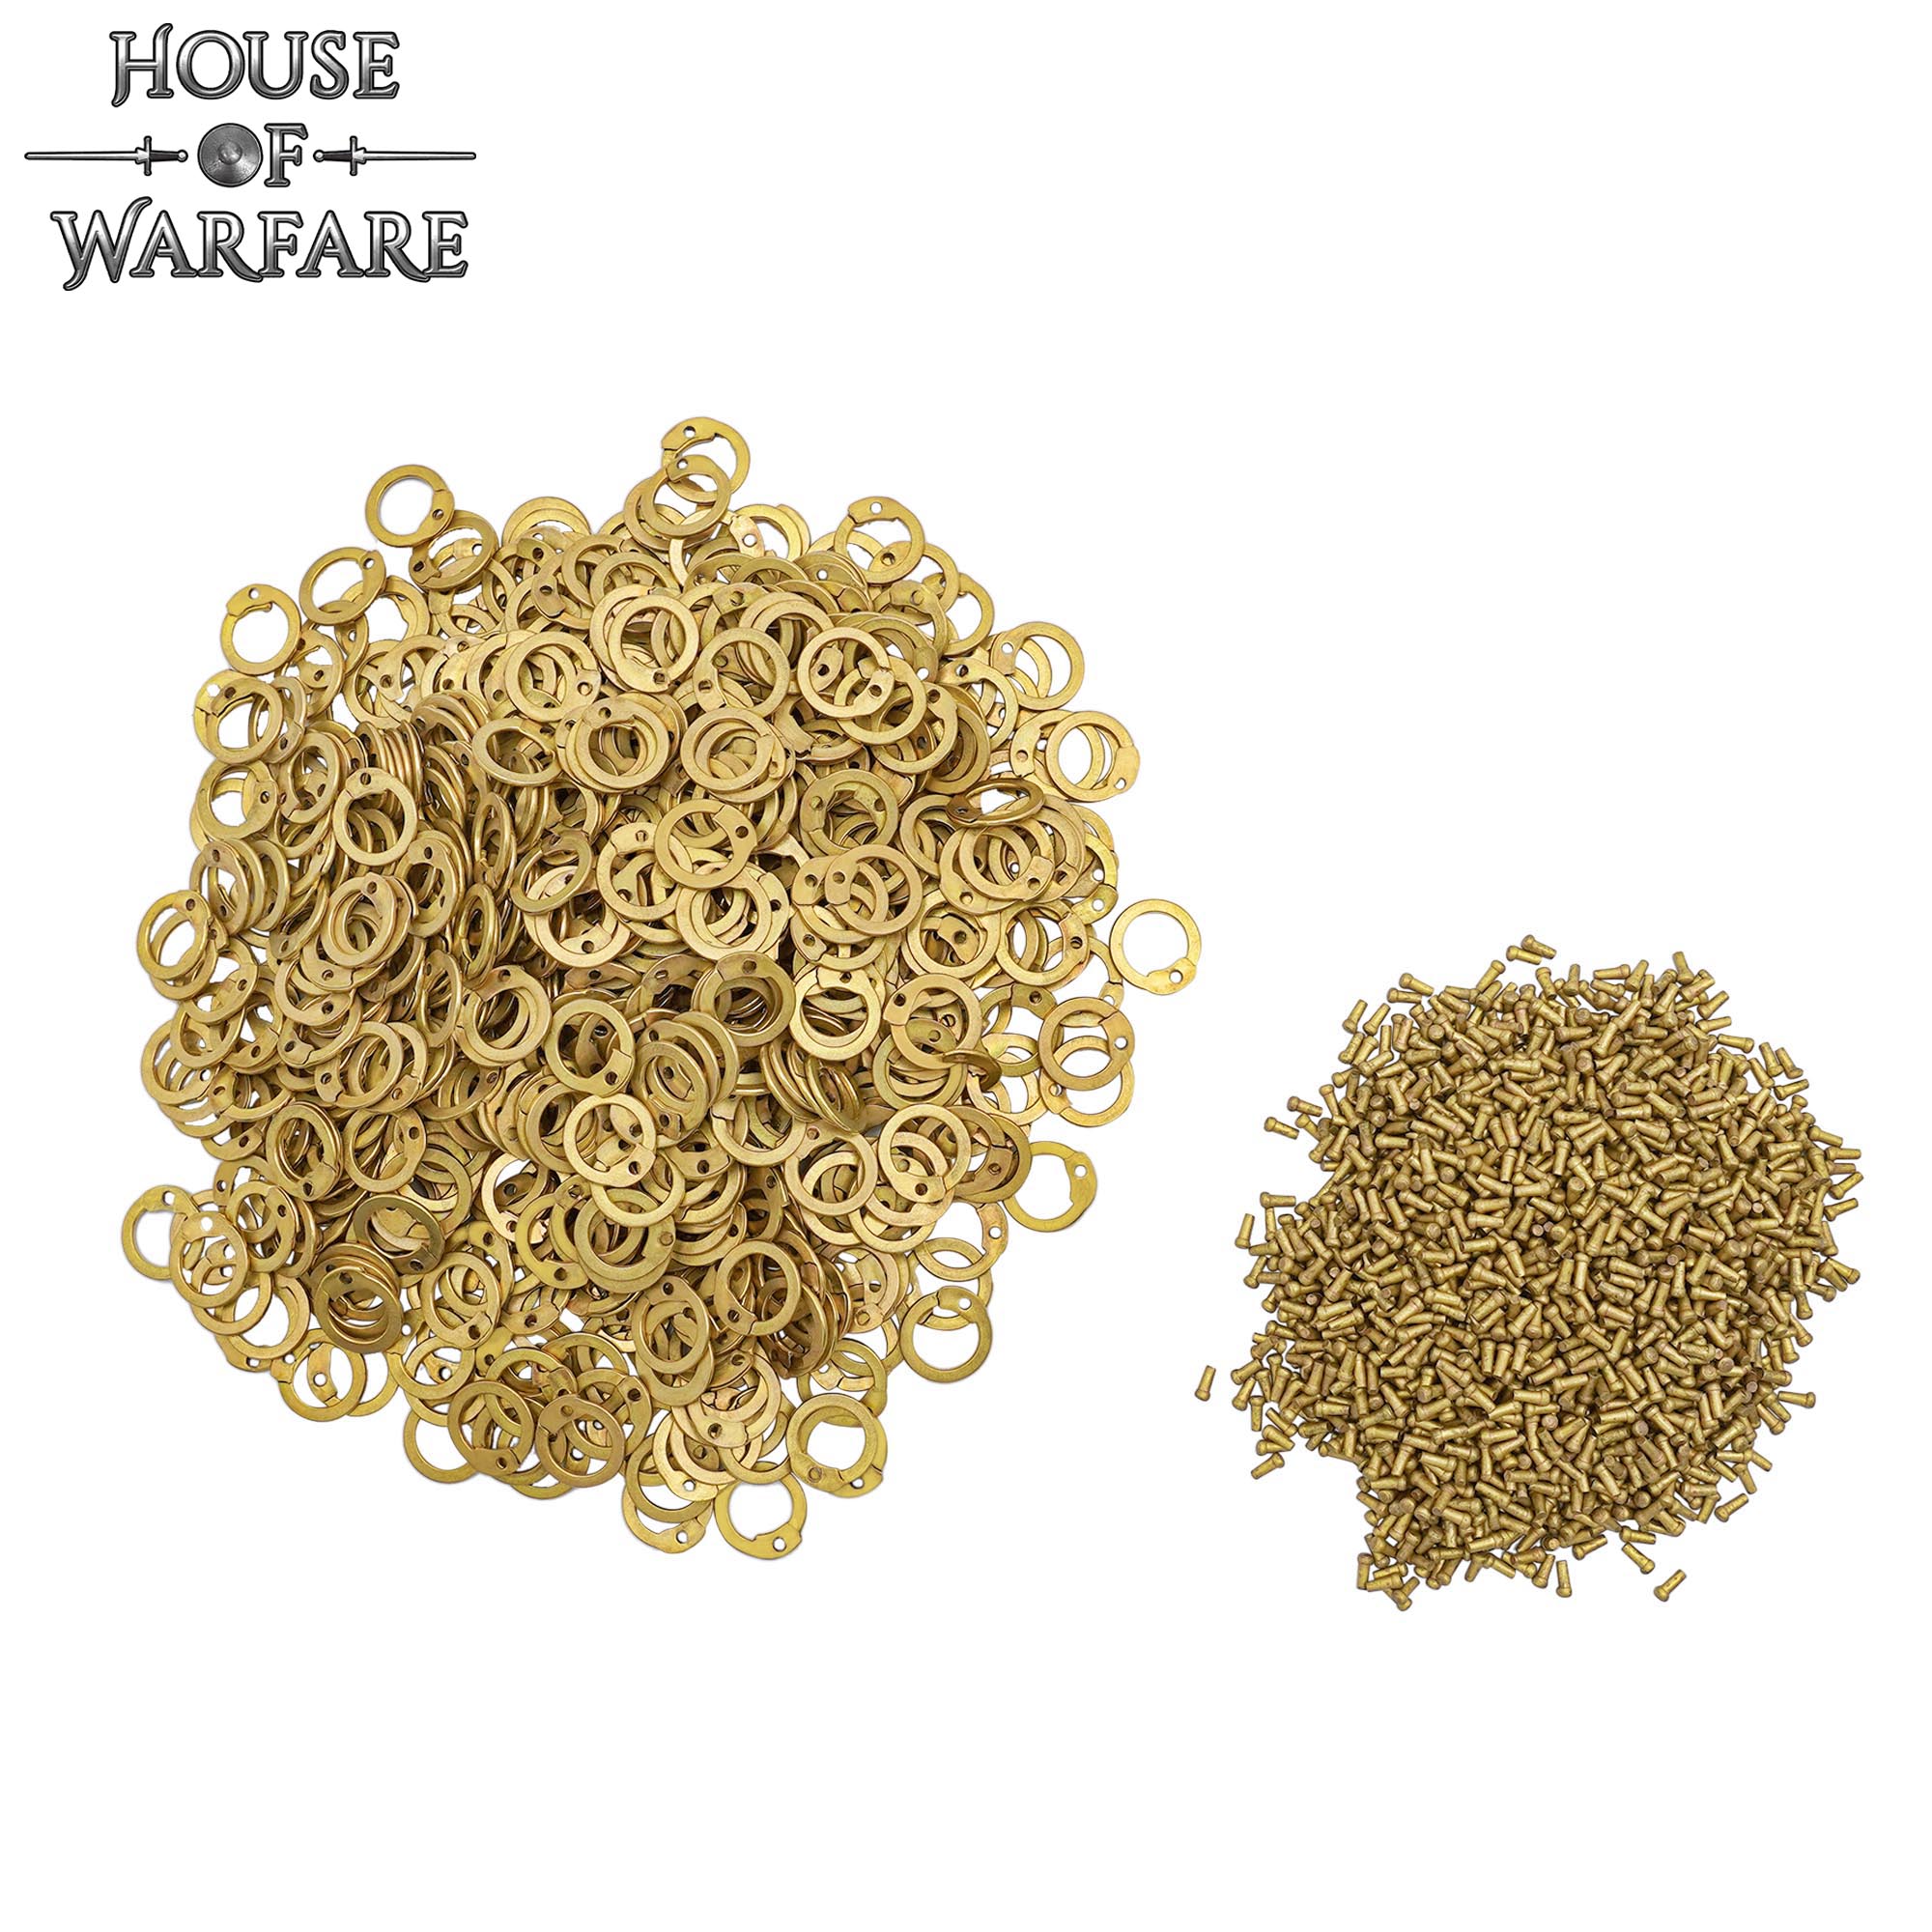 ⭐ Loose Chainmail Rings, Solid Brass Flat Rings with Round Rivets, 8mm  17gauge - Medieval Shop at House of Warfare